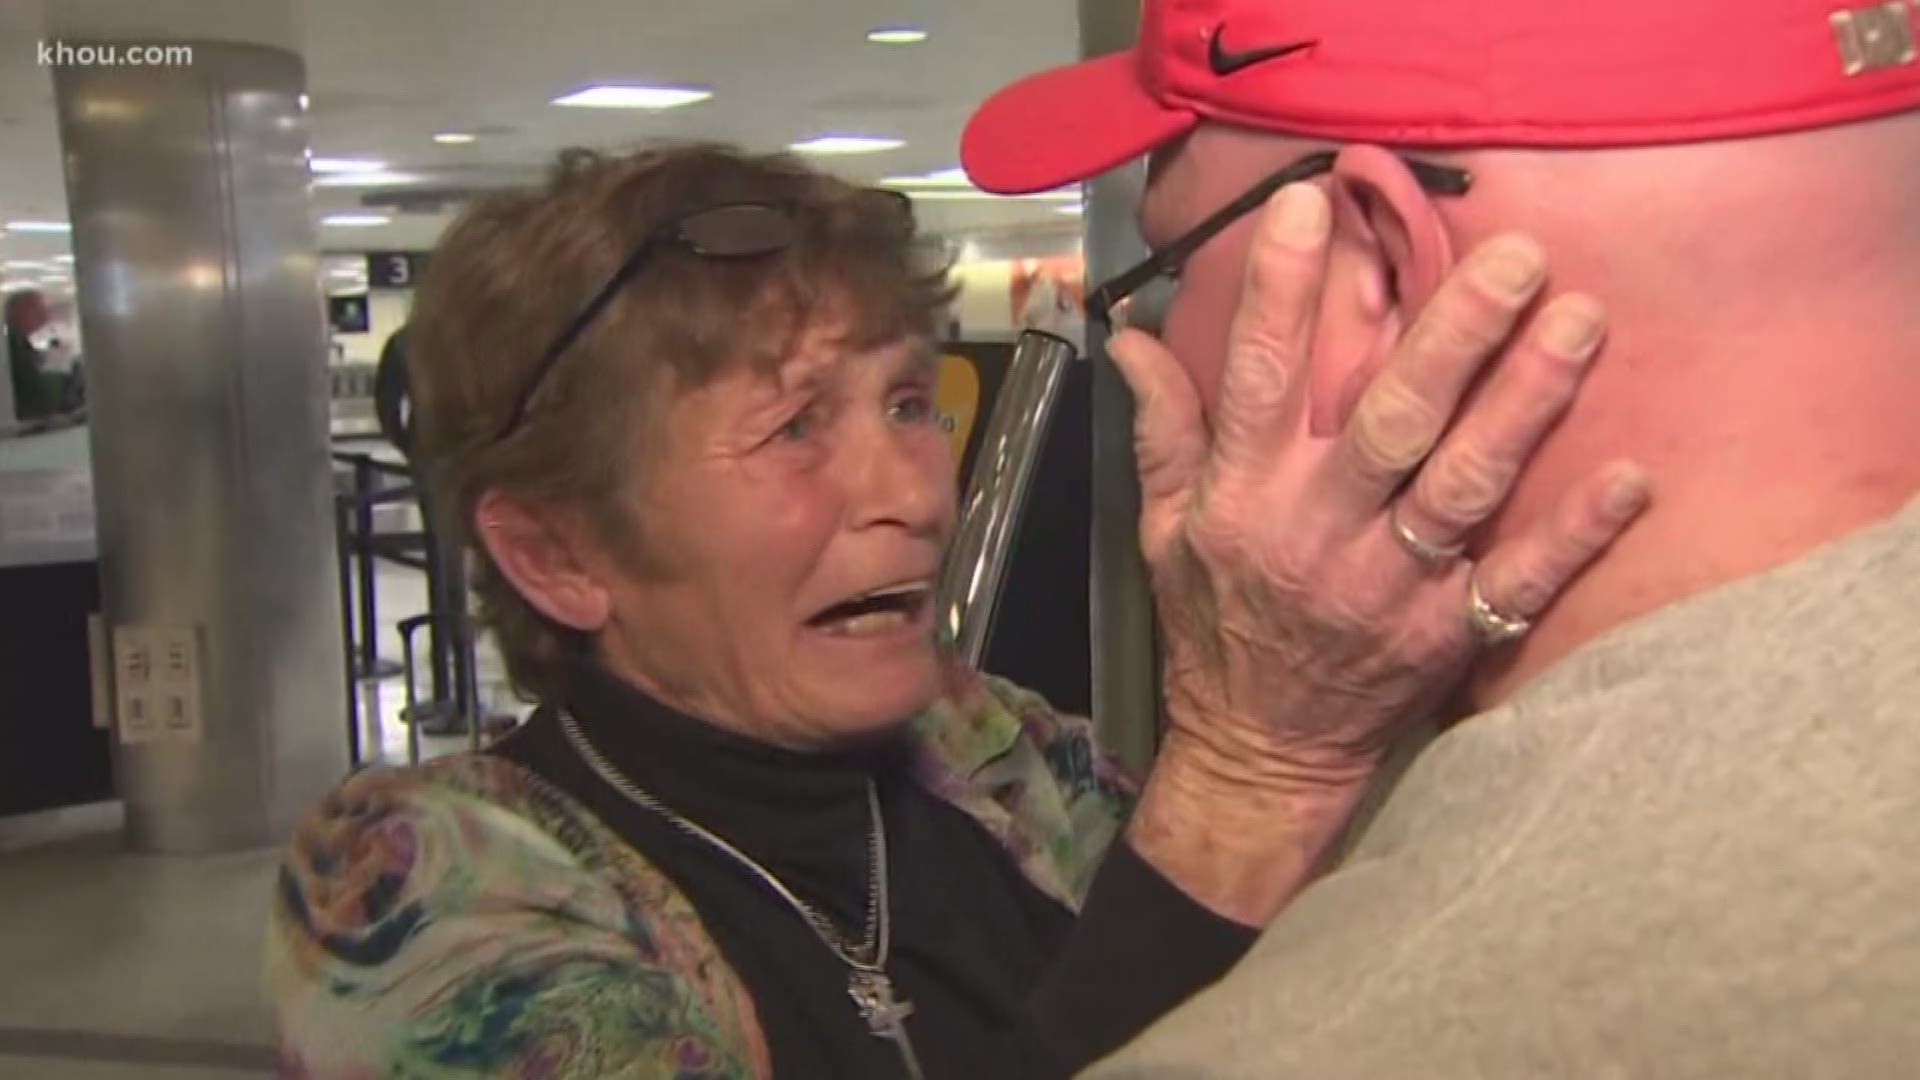 A DNA test led a man in West Virginia to a reunion with his mother in Houston after searching decades for one another.